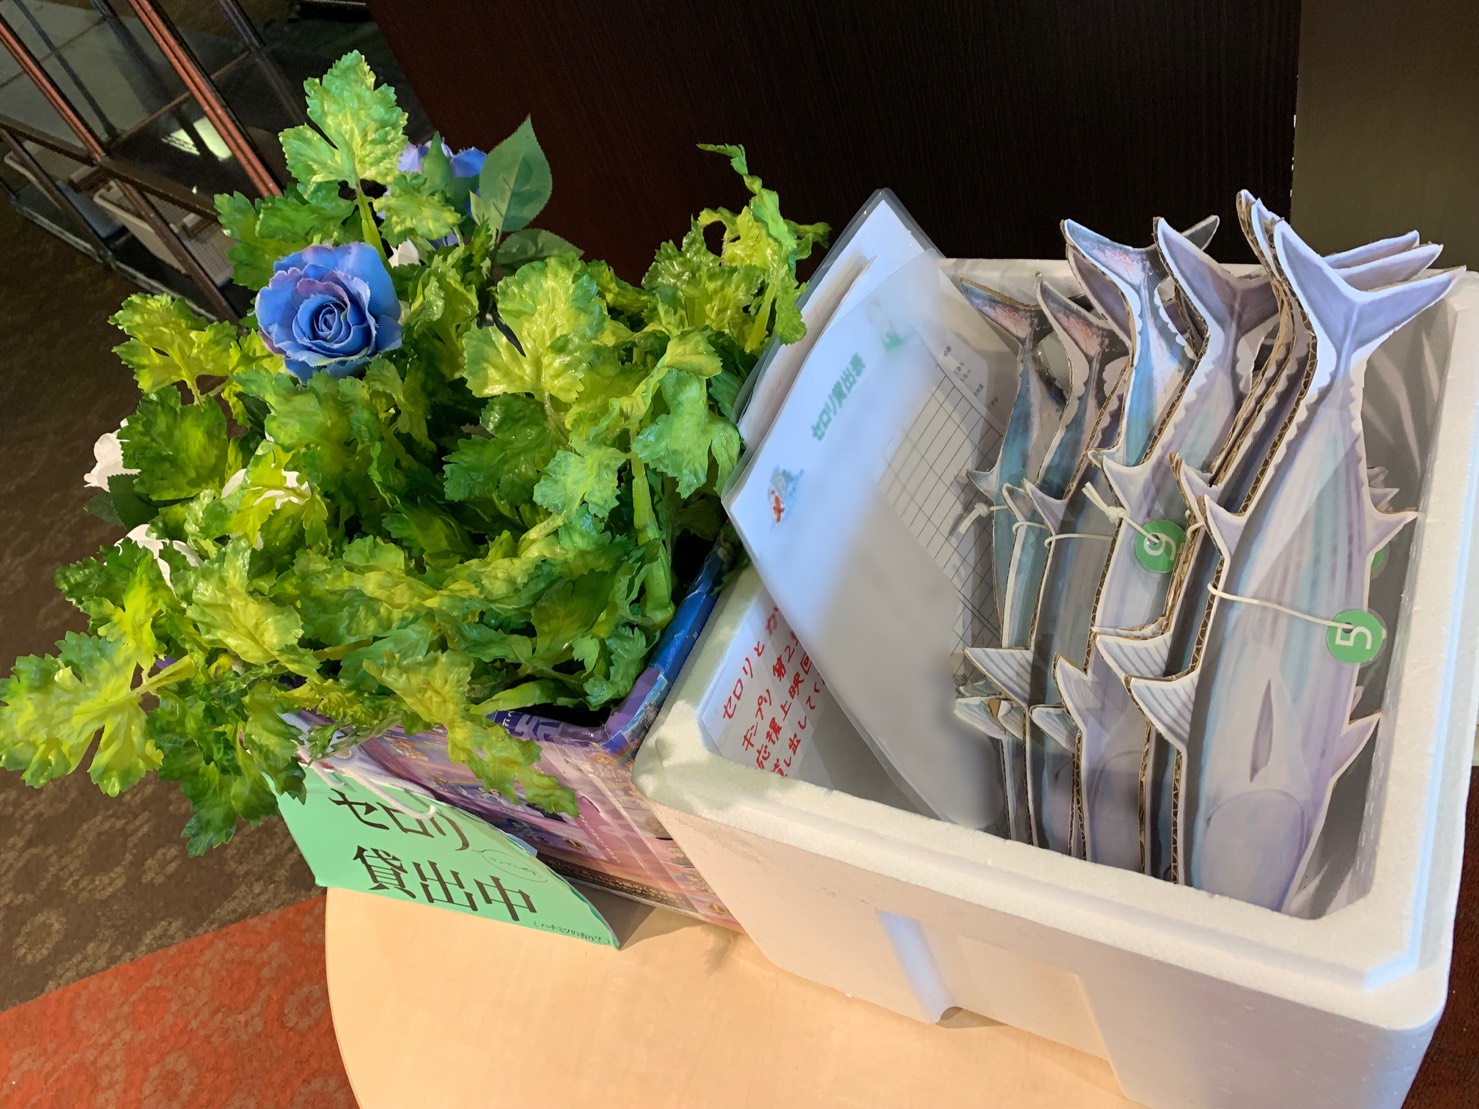 Materials available at the movie theater for audiences to rent to use when cheering. Those shown include popular items from the King of Prism series, like celery sticks and laminated pictures of bonito fish.